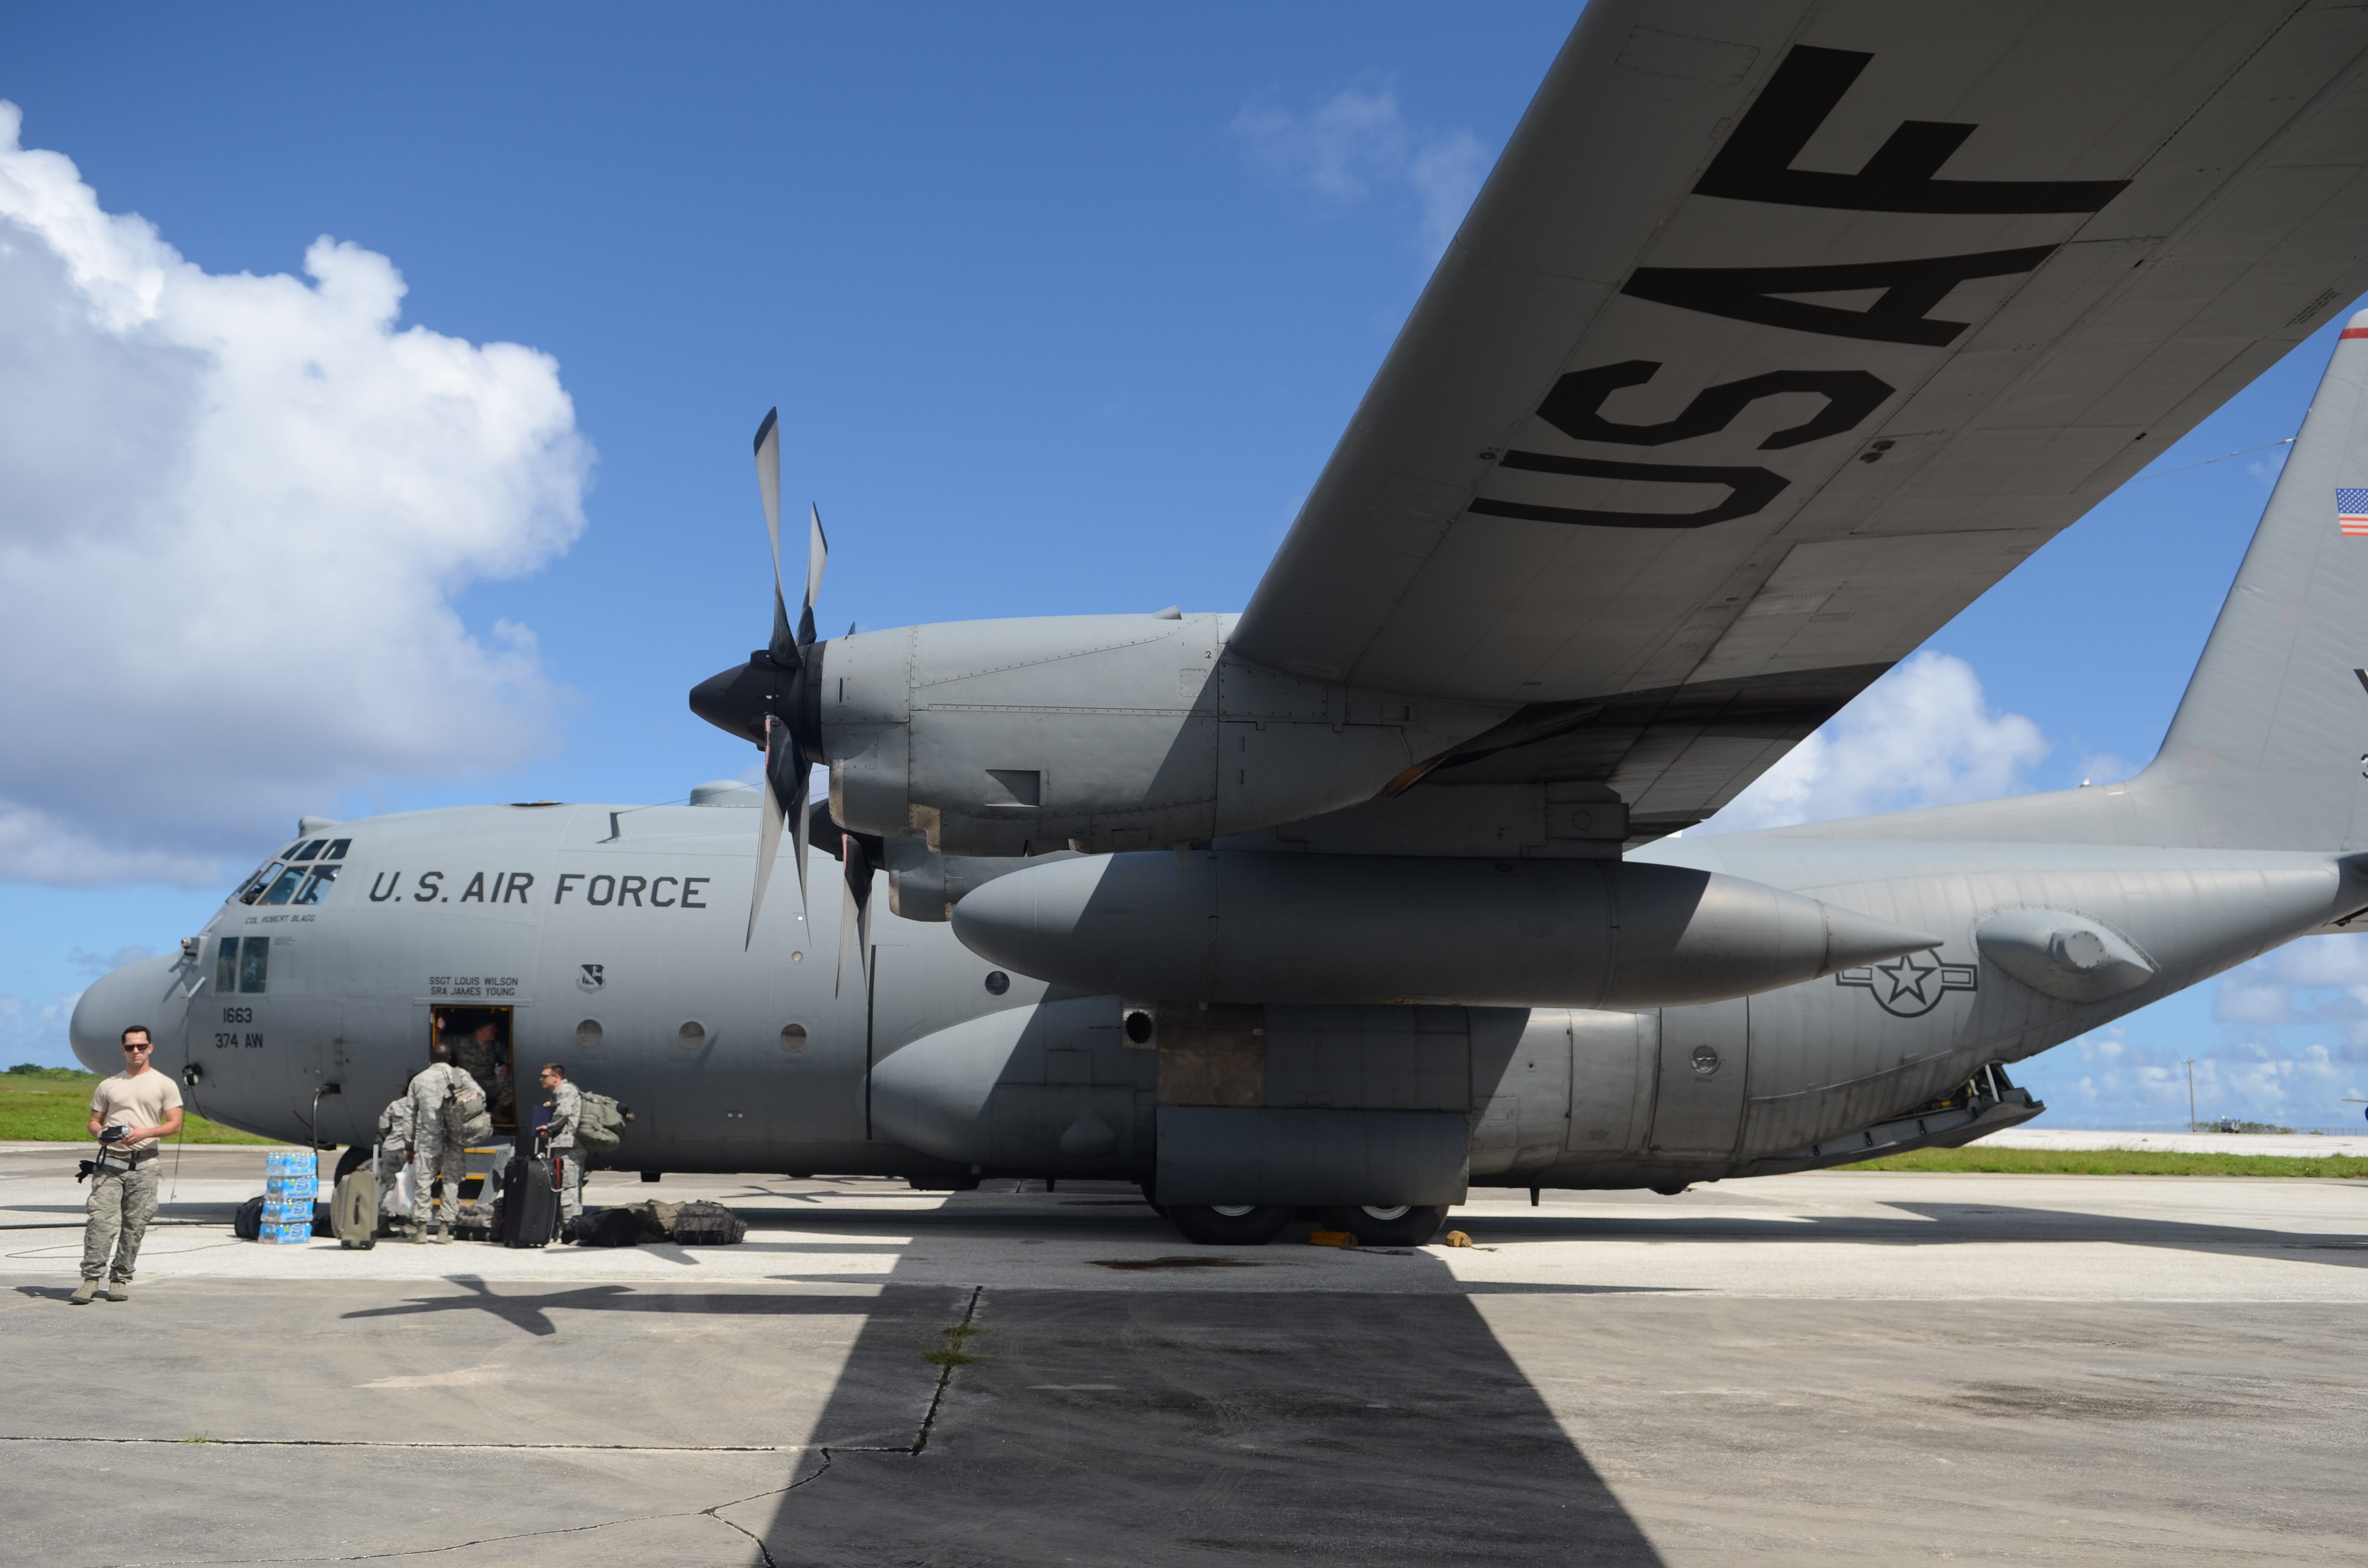 U.S._Airmen_with_the_36th_Contingency_Response_Group_board_a_C-130_Hercules_aircraft_at_Andersen_Air_Force_Base,_Guam,_before_departing_for_a_mission_in_support_of_Operation_Damayan_in_Tacloban,_Philippines_131114-F-NA975-297.jpg